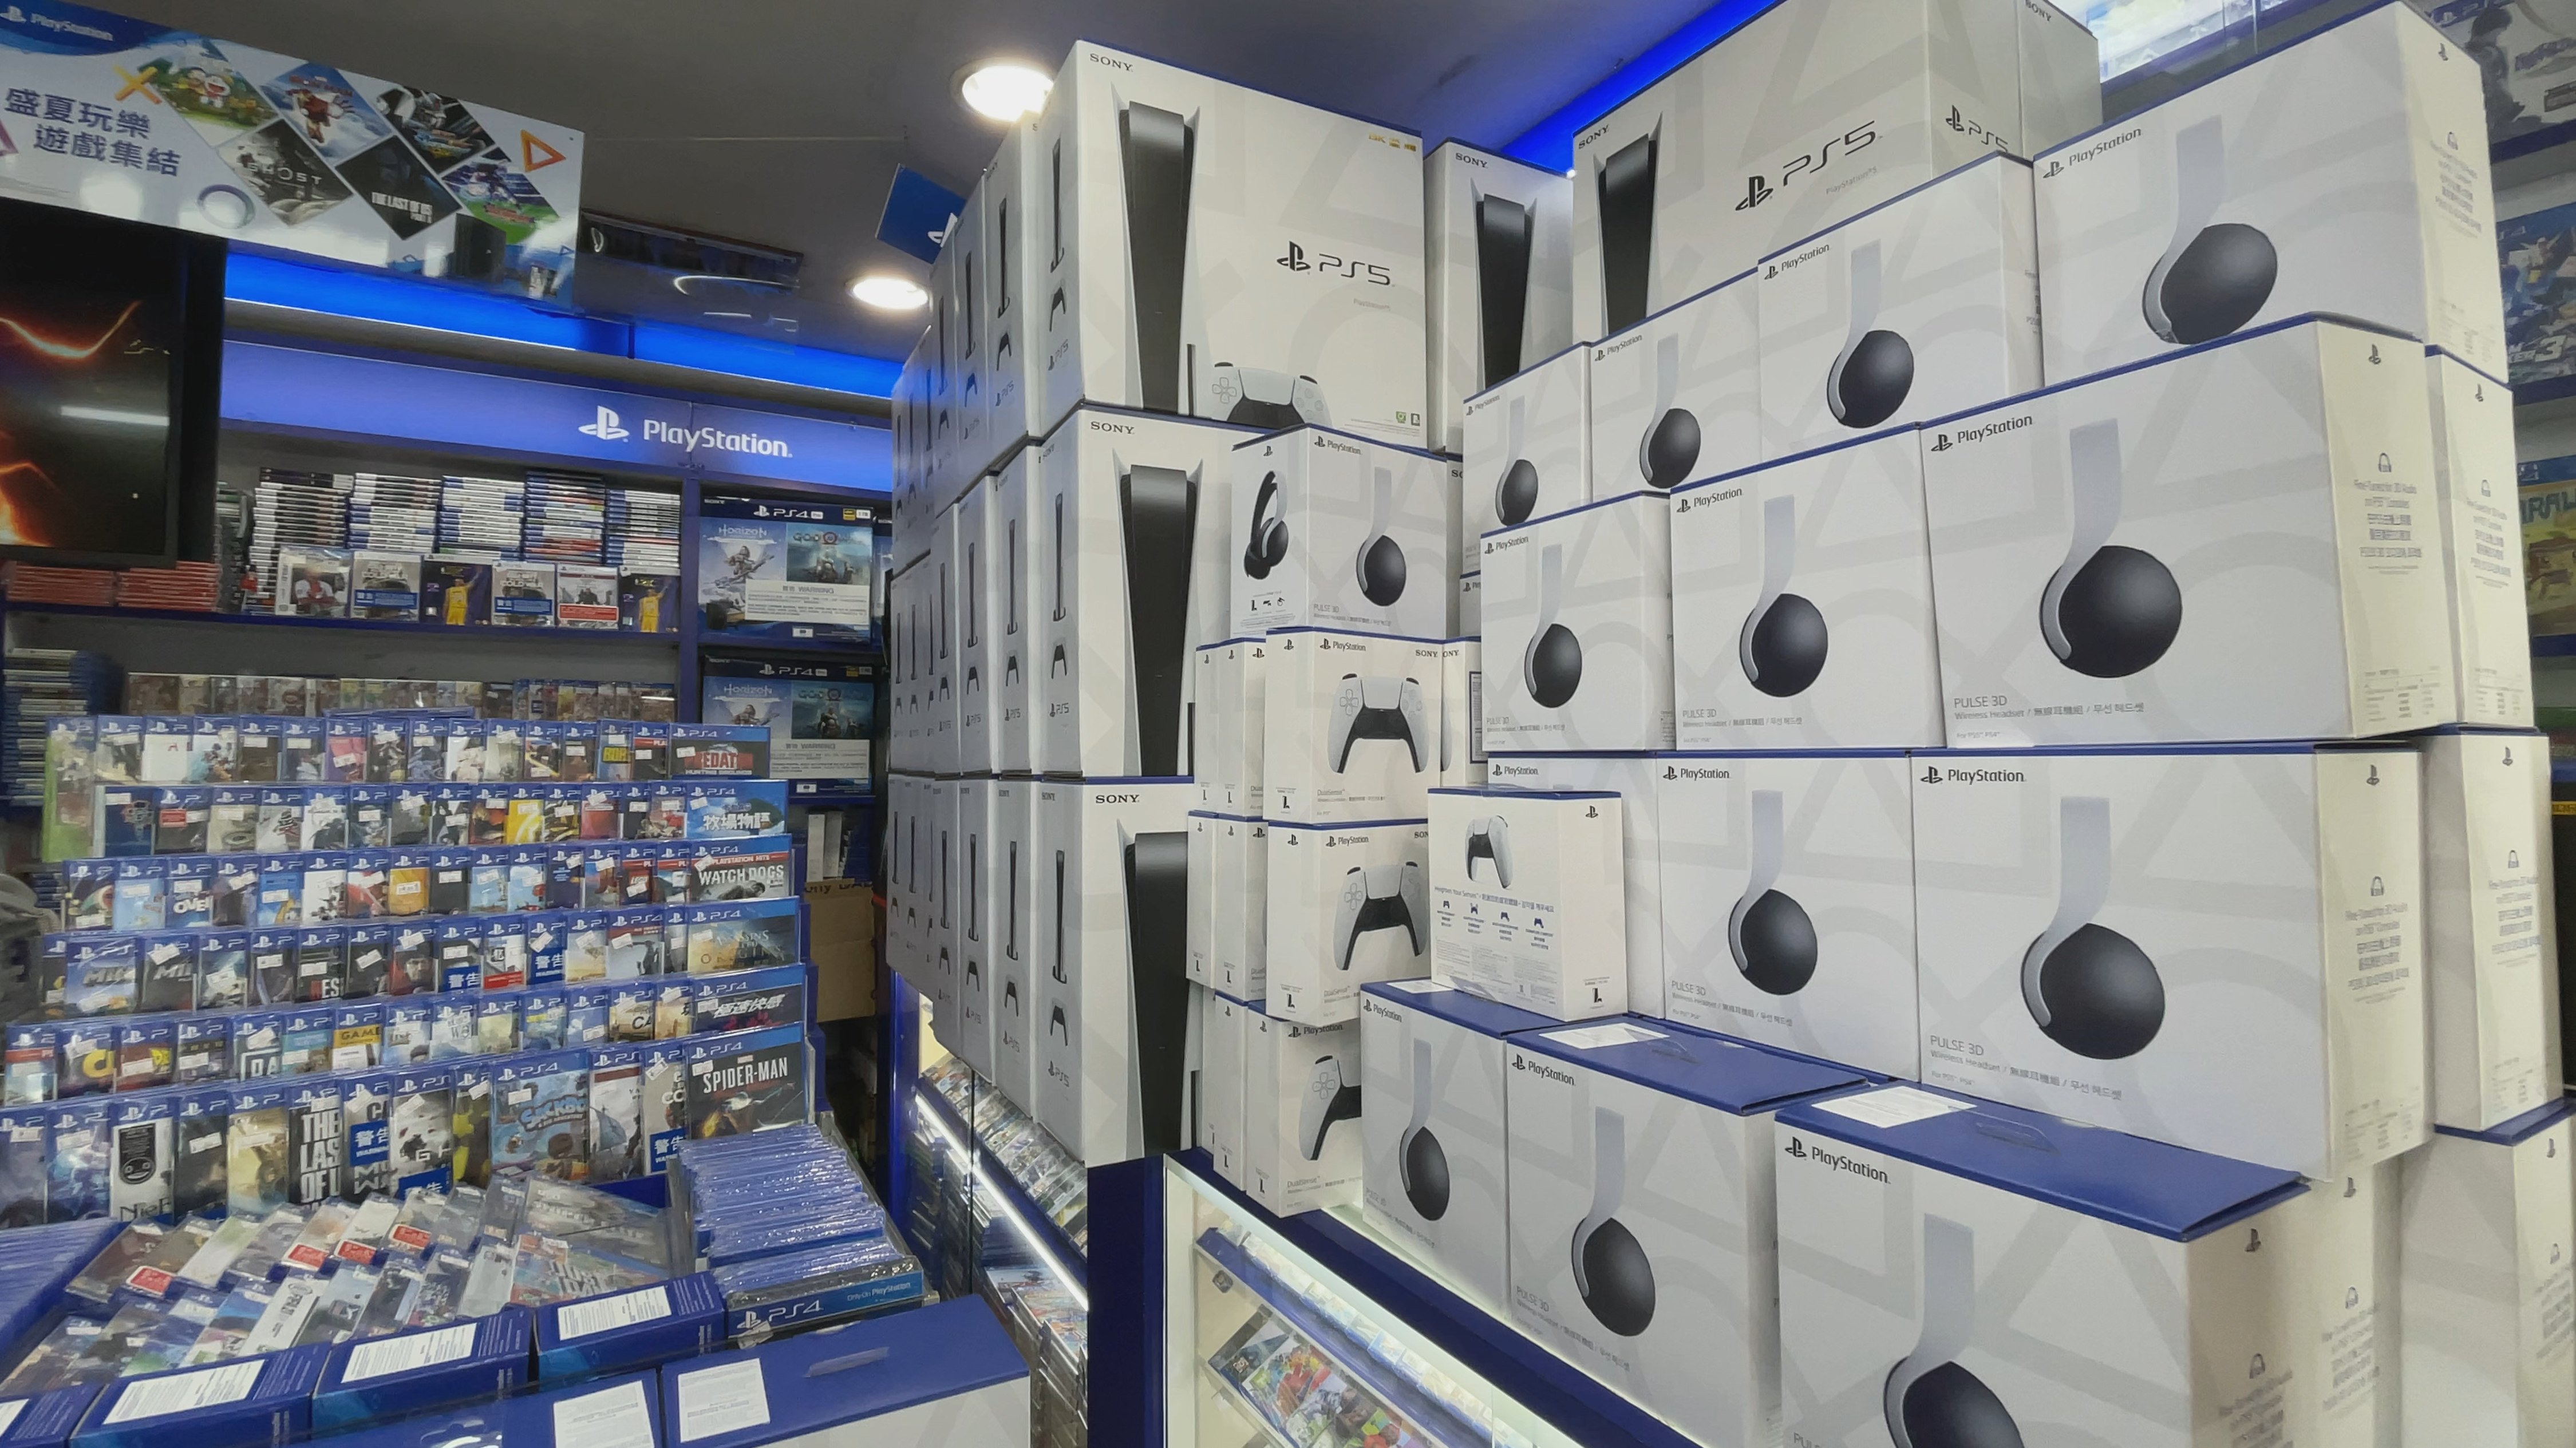 Sony Corp’s PlayStation 5 video game console went on sale in Hong Kong on November 19, 2020, but it has yet to launch in mainland China. Photo: Chris Chang